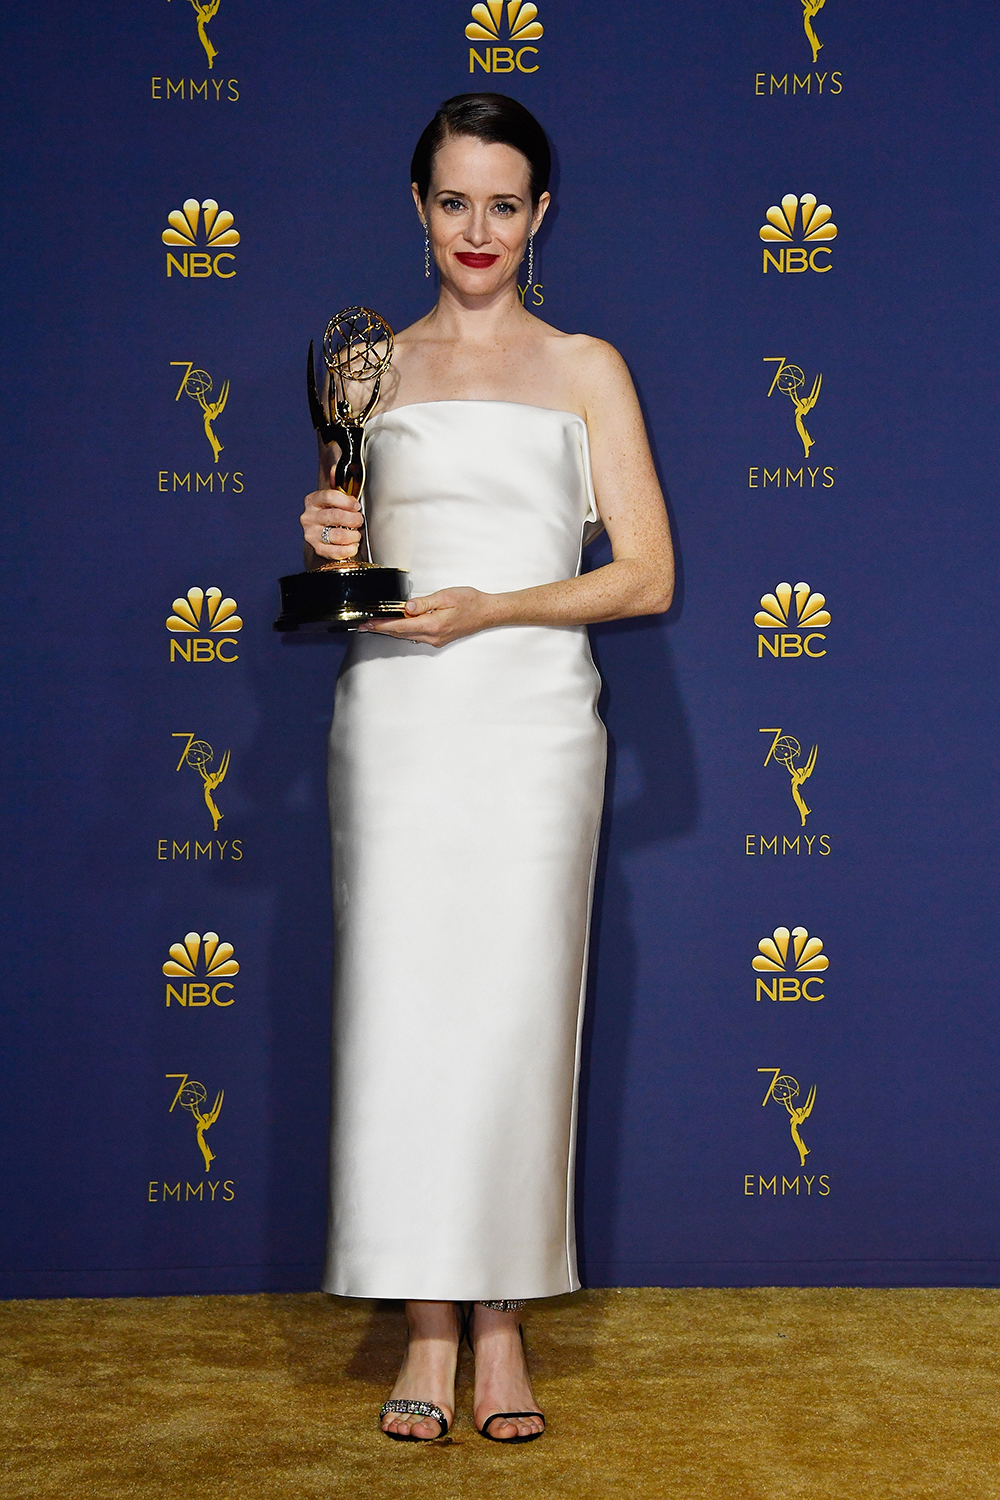 LOS ANGELES, CA - SEPTEMBER 17: Outstanding Lead Actress in a Drama Series Claire Foy poses in the press room during the 70th Emmy Awards at Microsoft Theater on September 17, 2018 in Los Angeles, California. (Photo by Frazer Harrison/Getty Images)